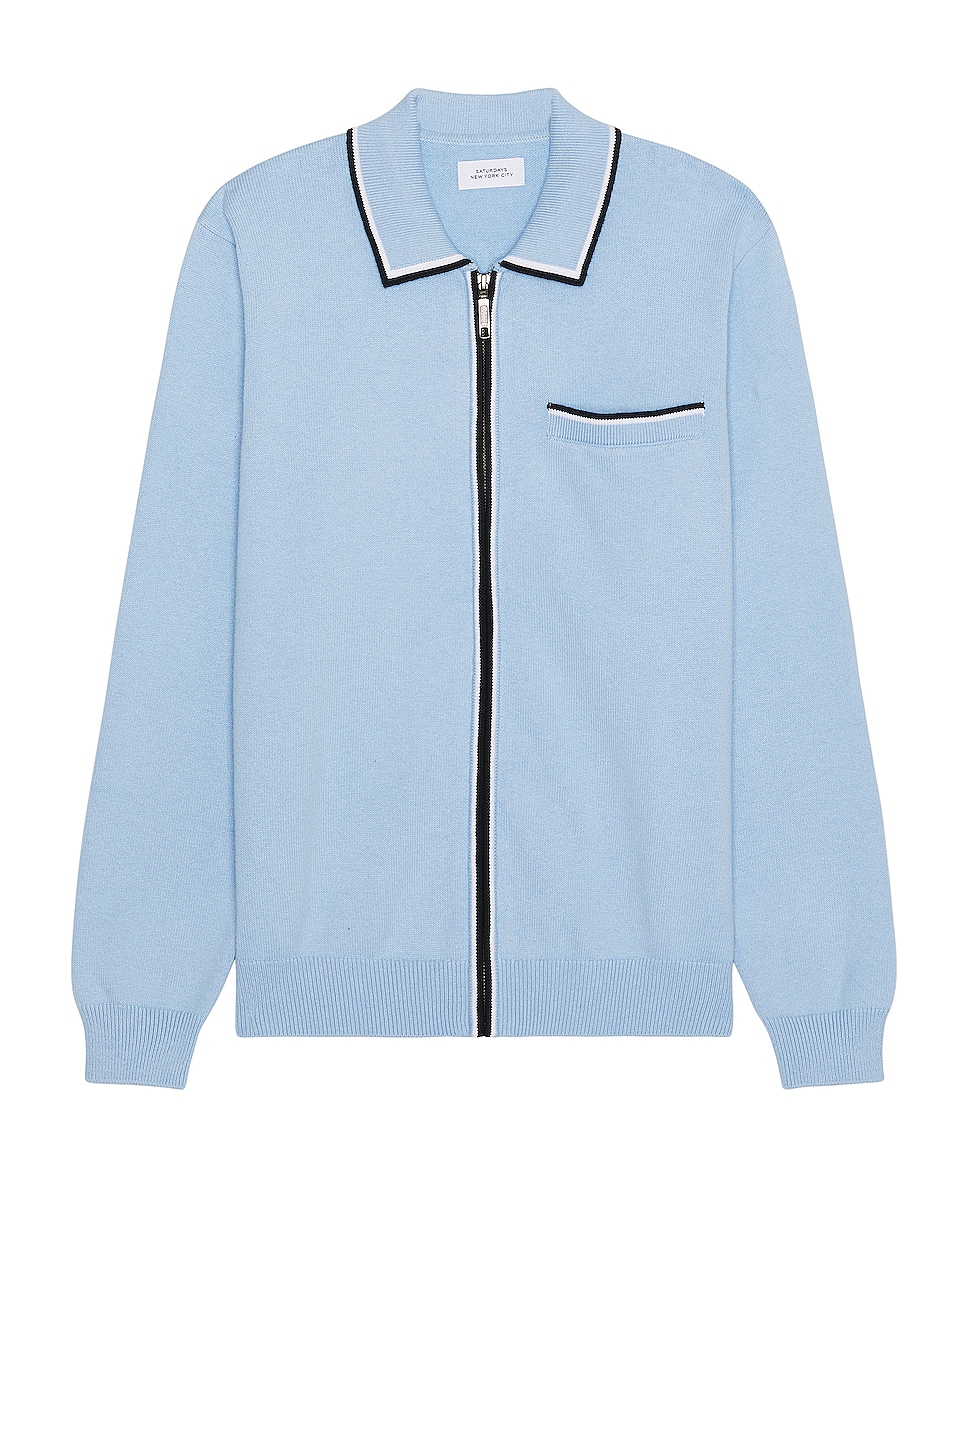 Image 1 of SATURDAYS NYC Saji Zip Polo Sweater in Forever Blue